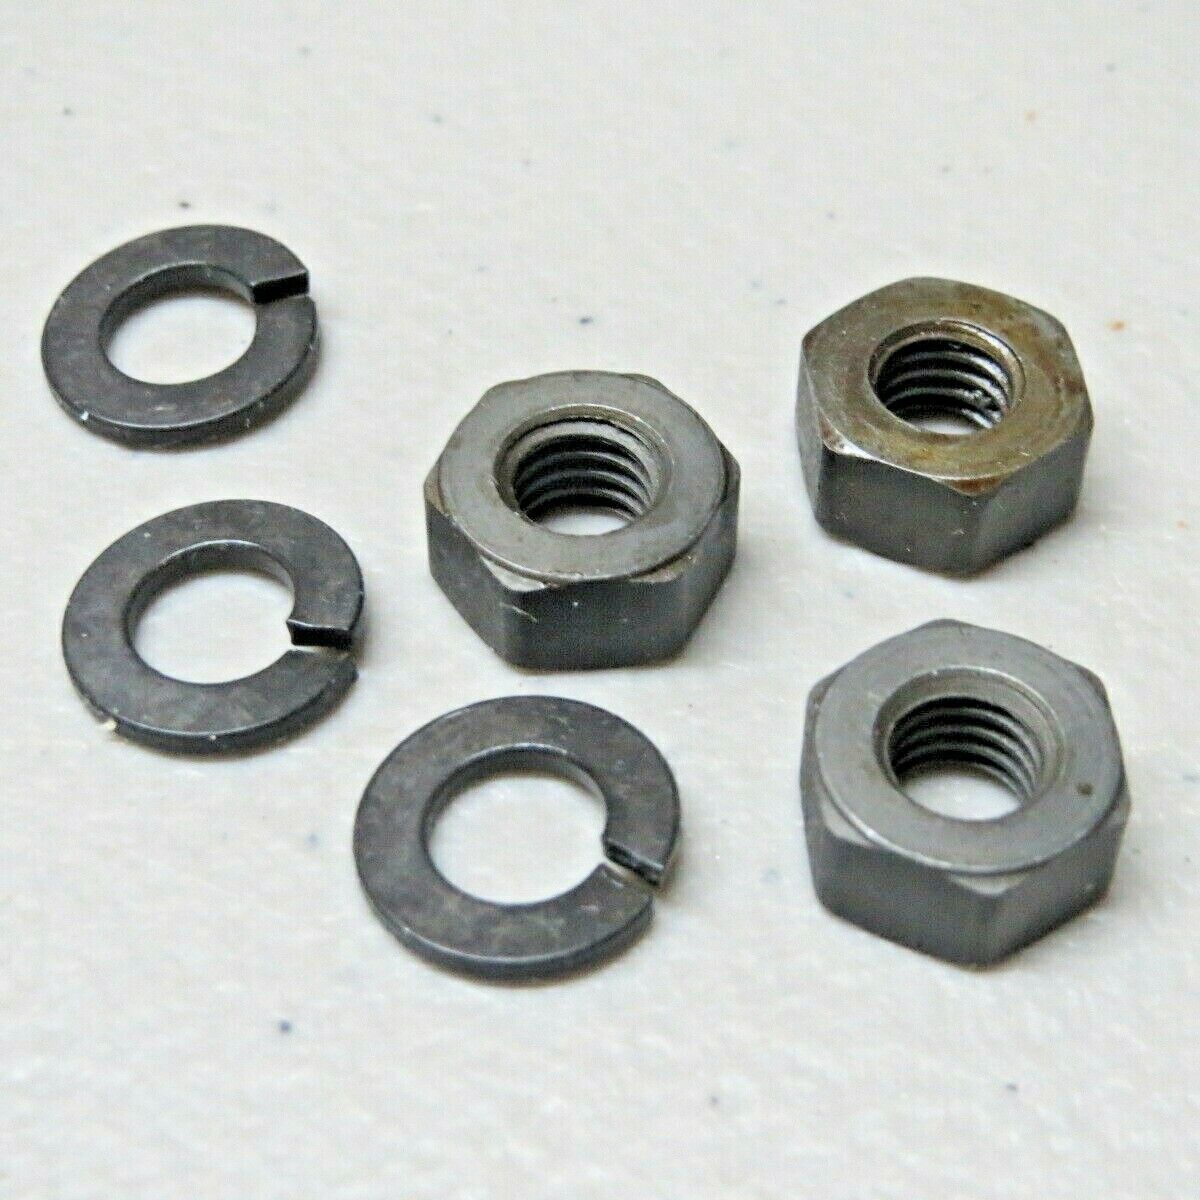 Harley 7695 (0109) 1/4-24 X 7/32 X 7/16 Hex Nuts Parkerized Knucklehead Panhead